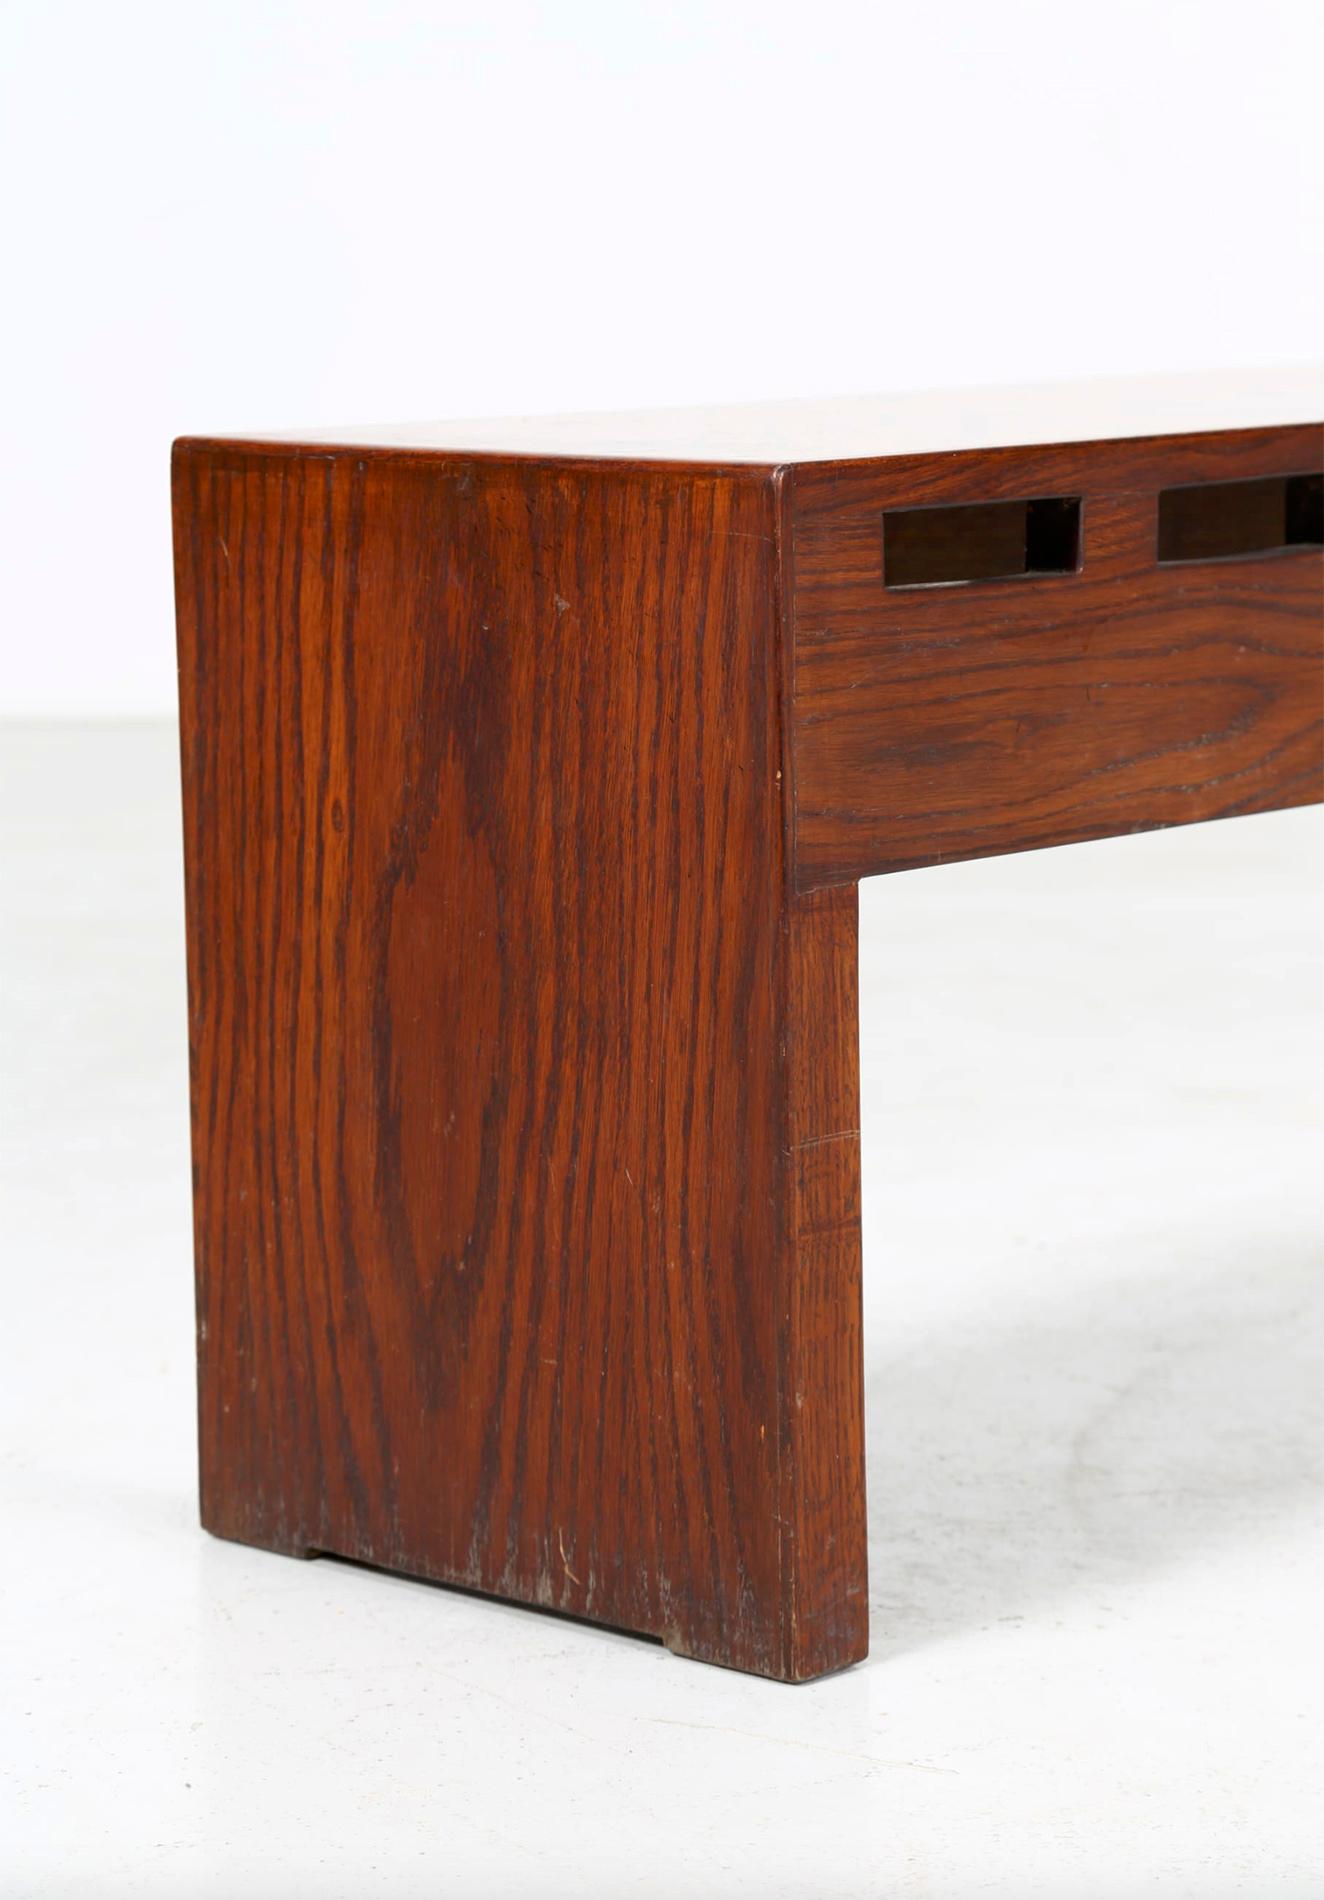 Rare bench created by Giuseppe Rivadossi, great Italian sculptor and designer. Its specialisation is the skilful working of wood.
The bench is made of rosewood. Made up of two side blocks and a central one, the bench is ideal for storing objects at